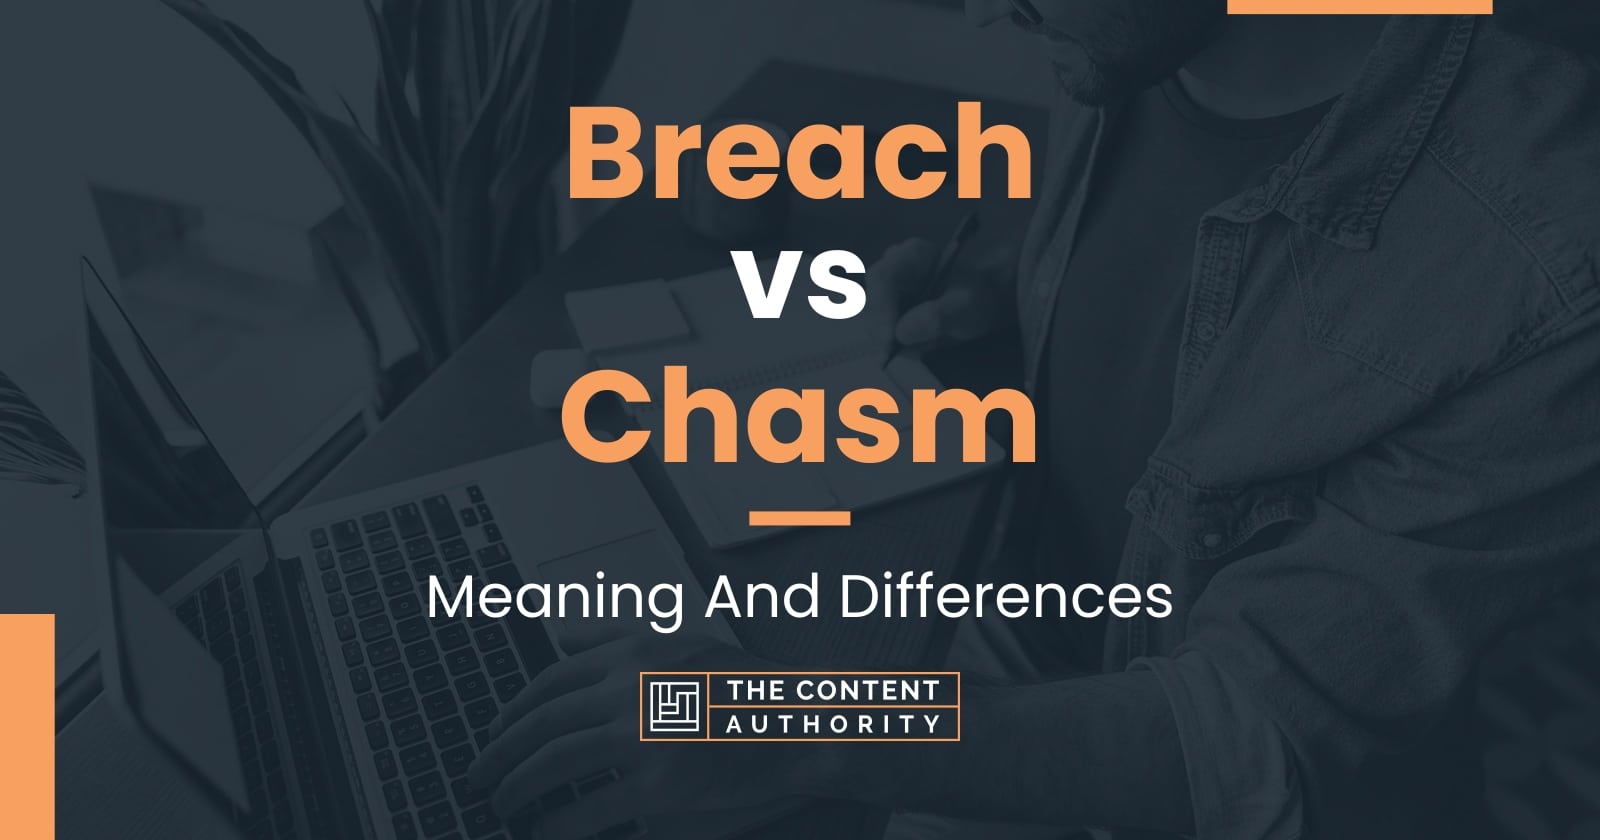 Breach vs Chasm: Meaning And Differences